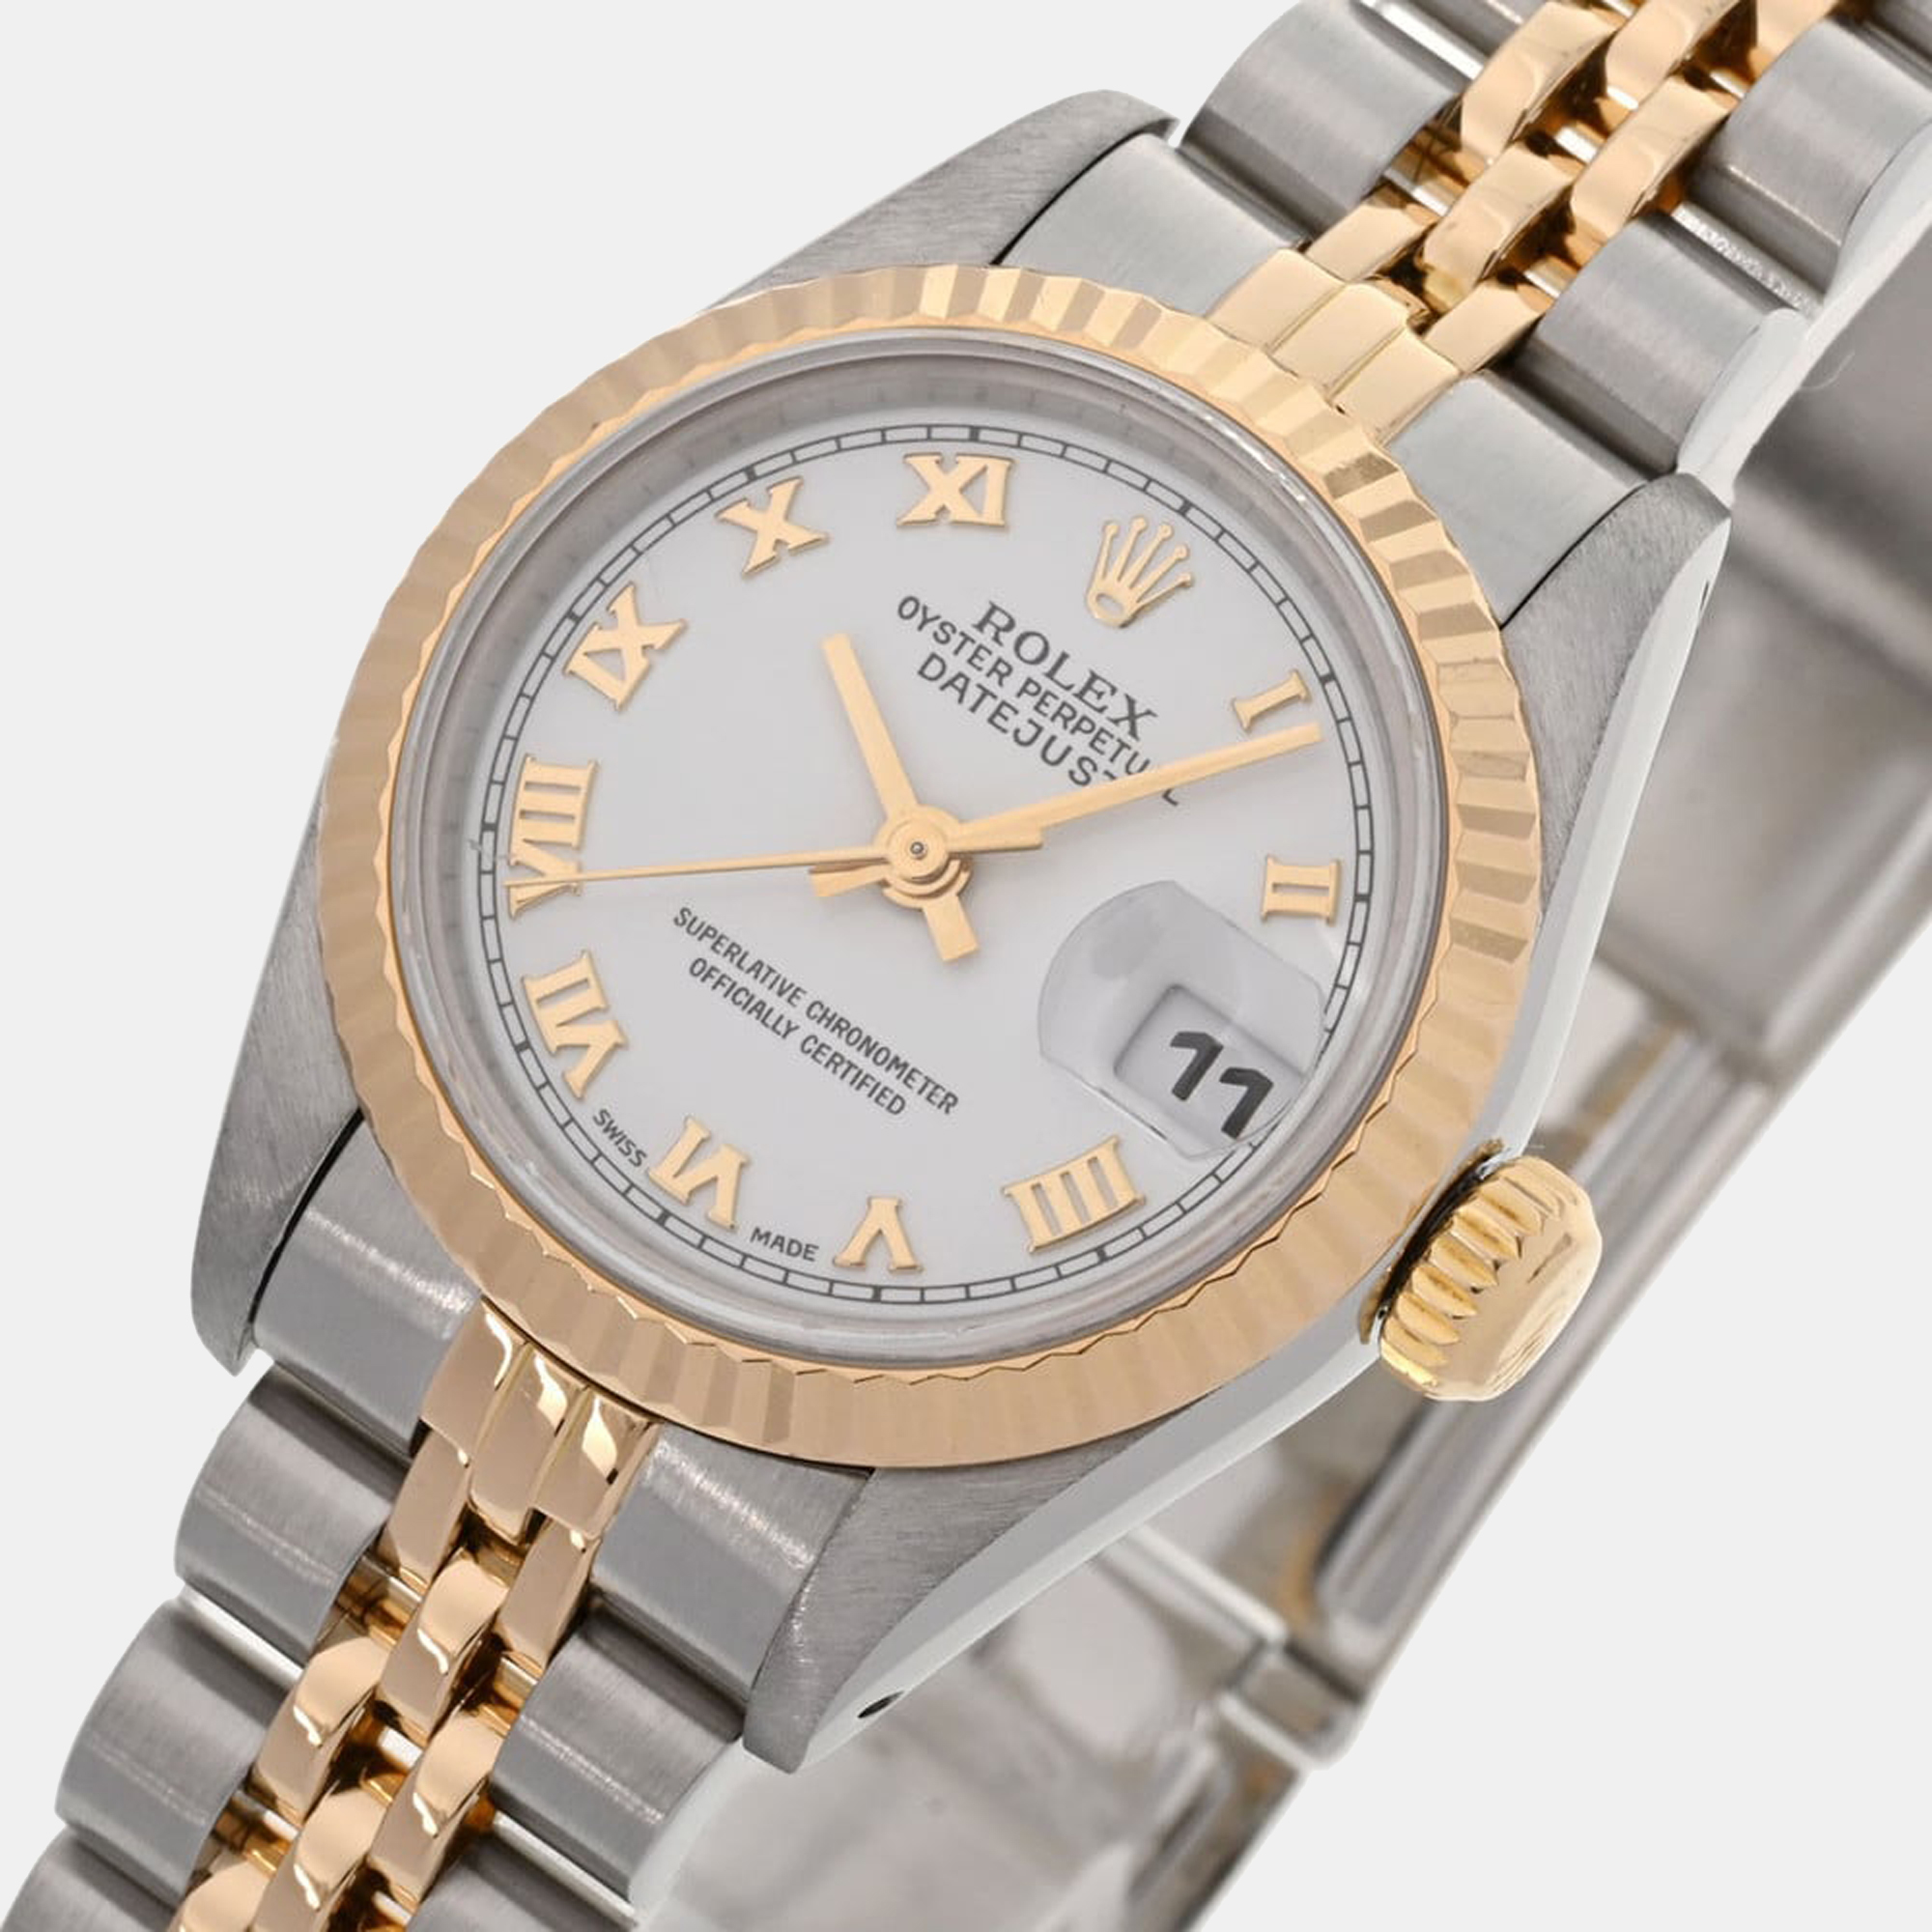 

Rolex White 18K Yellow Gold And Stainless Steel Datejust 69173 Women's Wristwatch 26 mm